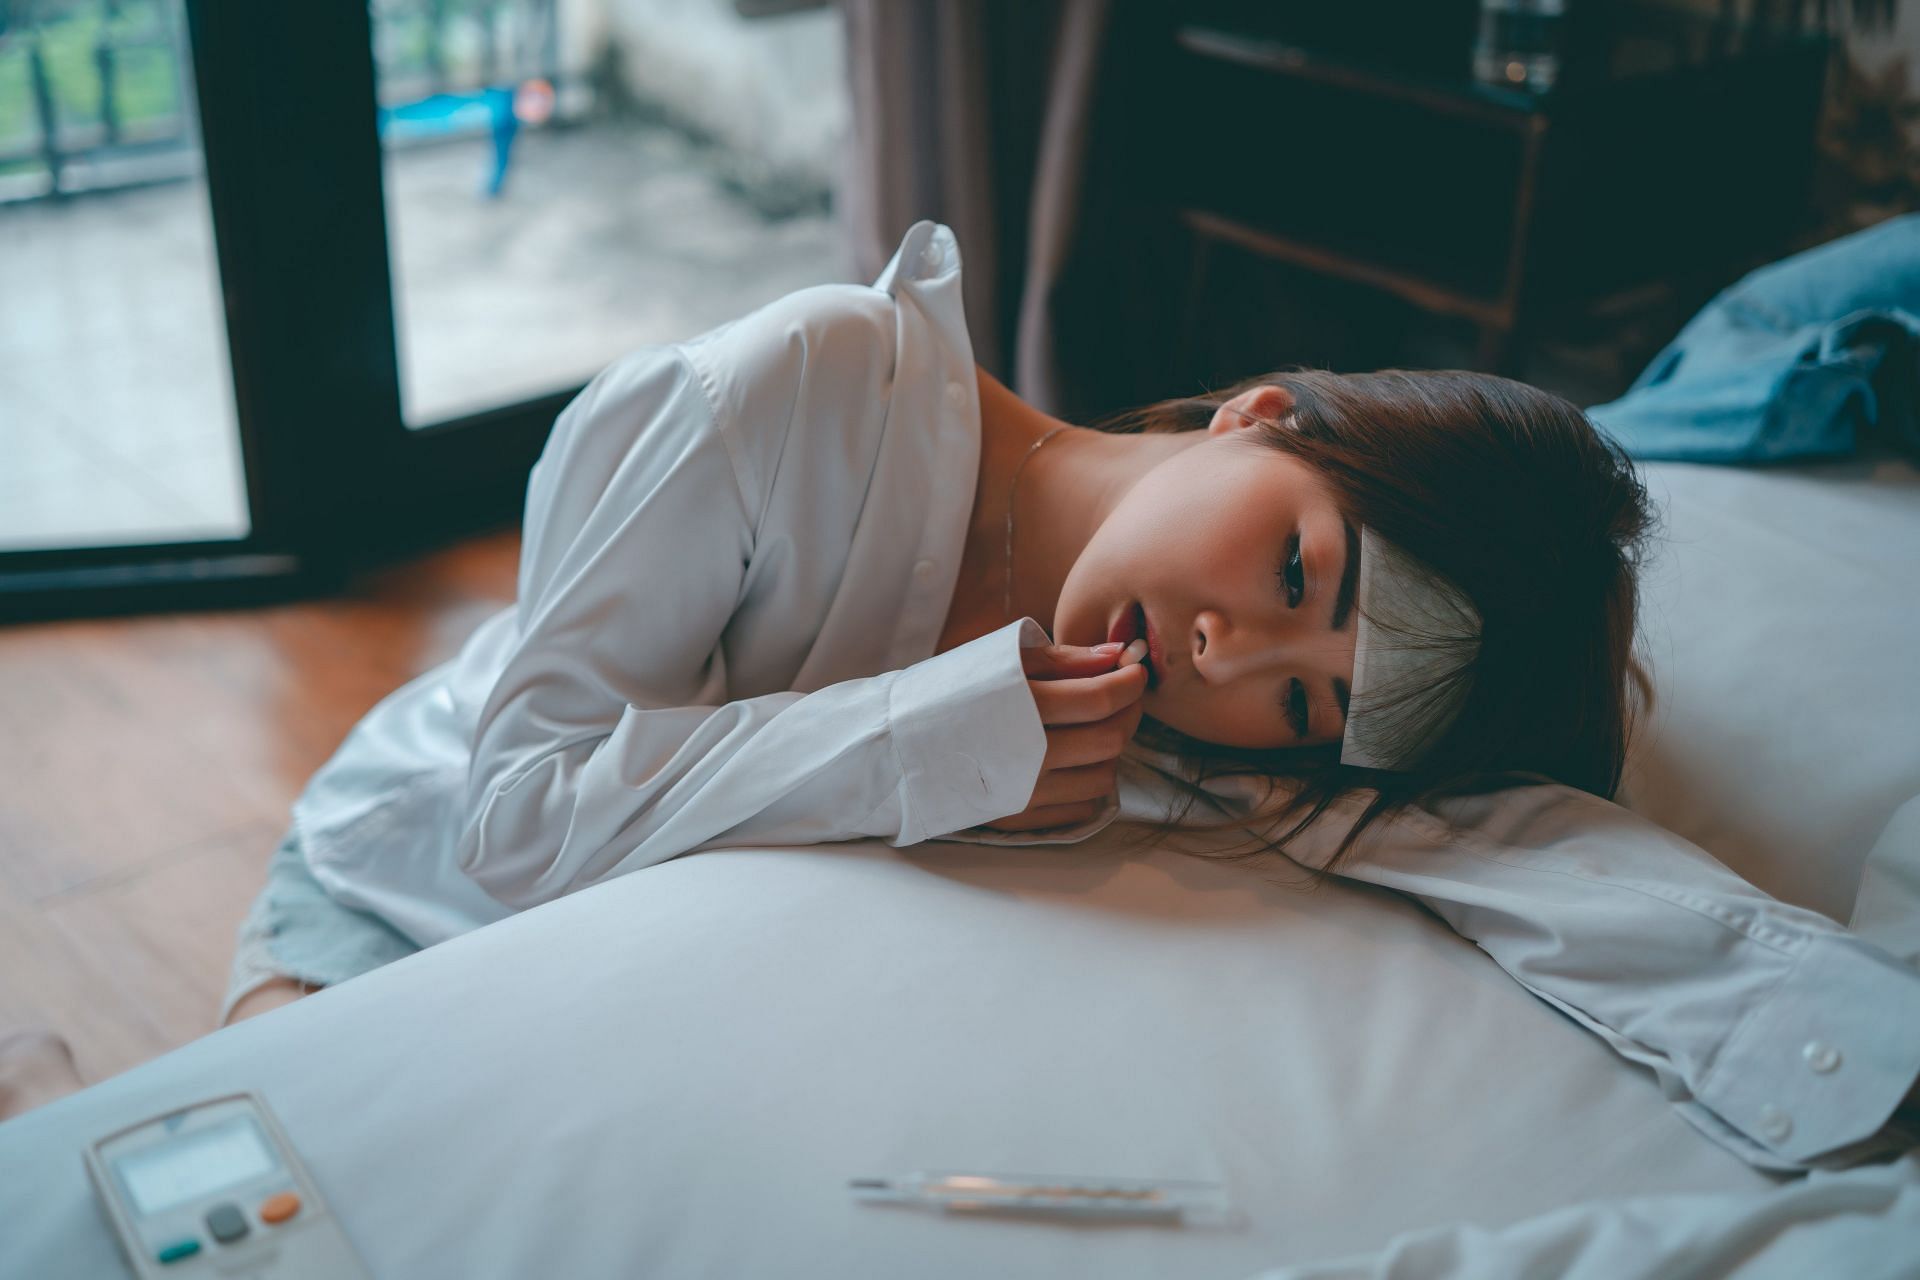 For how long symptoms of food poisoning may last depends on causes. (Image via Pexels/Hải Nguyễn)